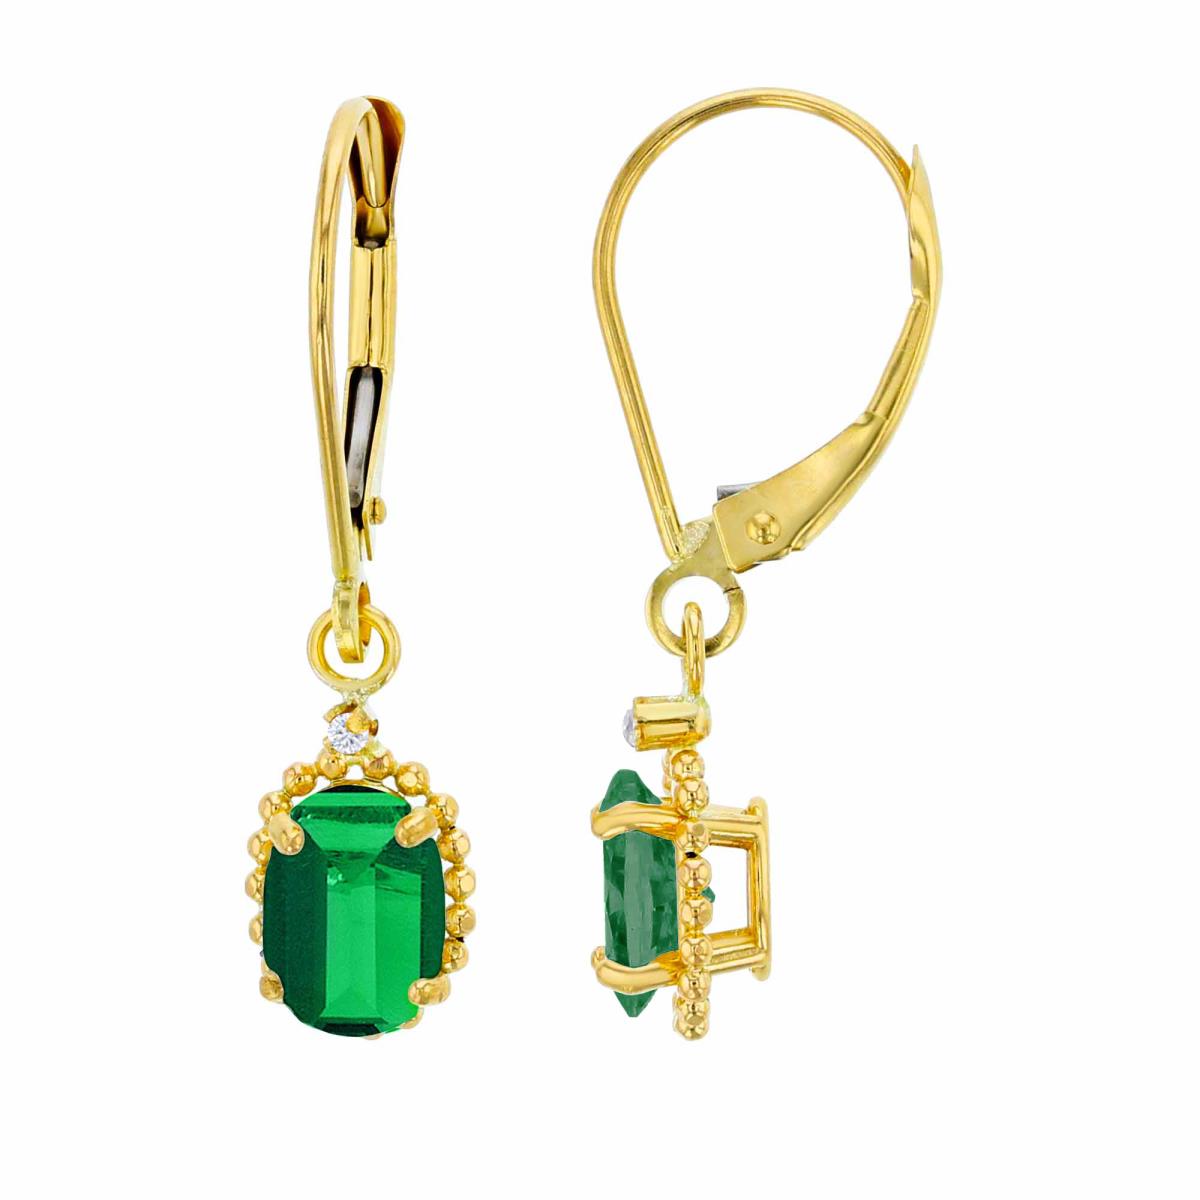 10K Yellow Gold 1.25mm Rd Created White Sapphire & 6x4mm Ov Created Emerald Bead Frame Drop Lever-Back Earring